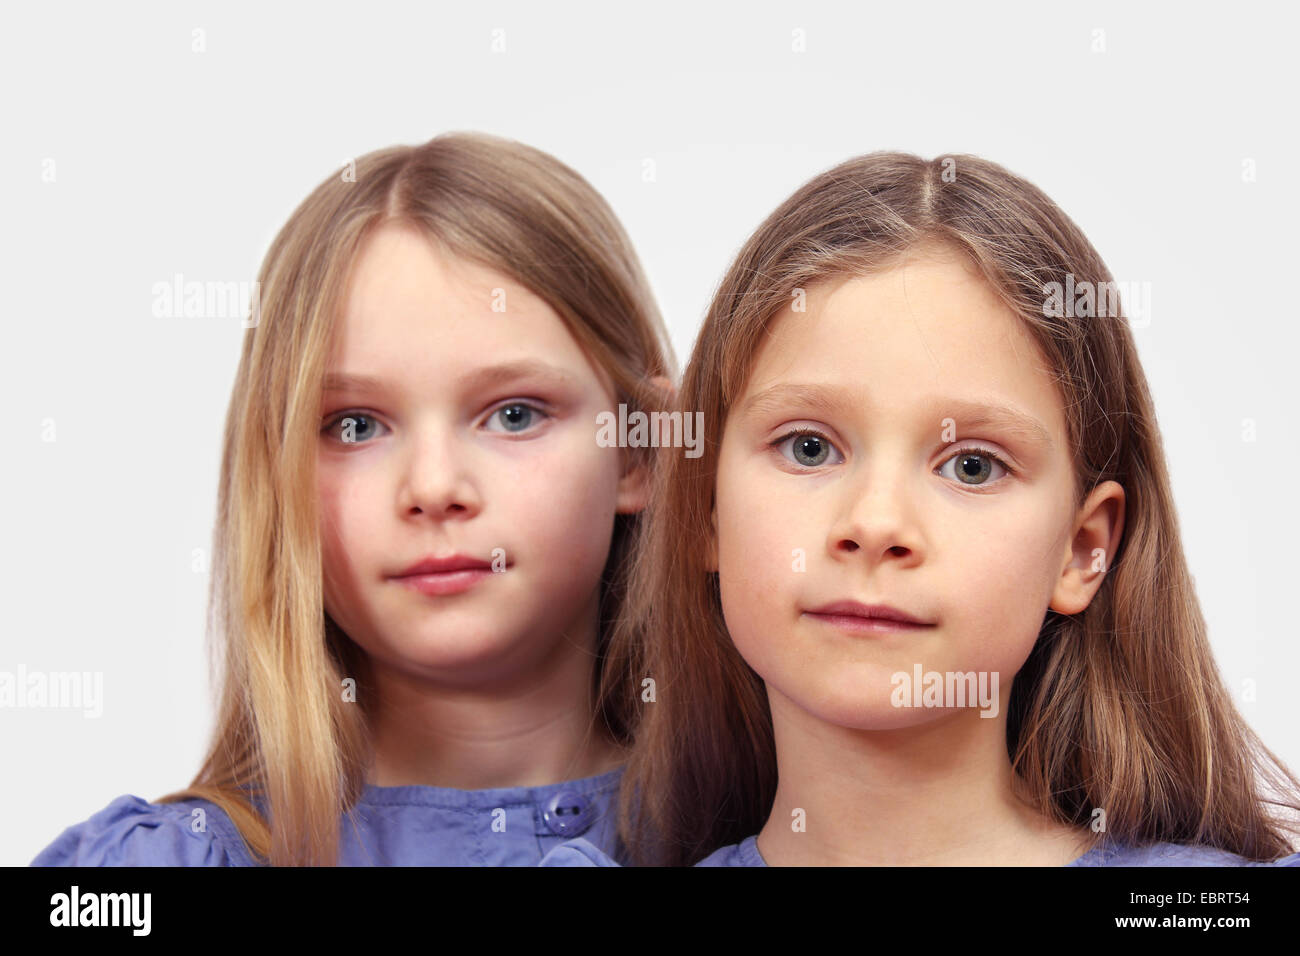 Two girls with long blond hair Stock Photo